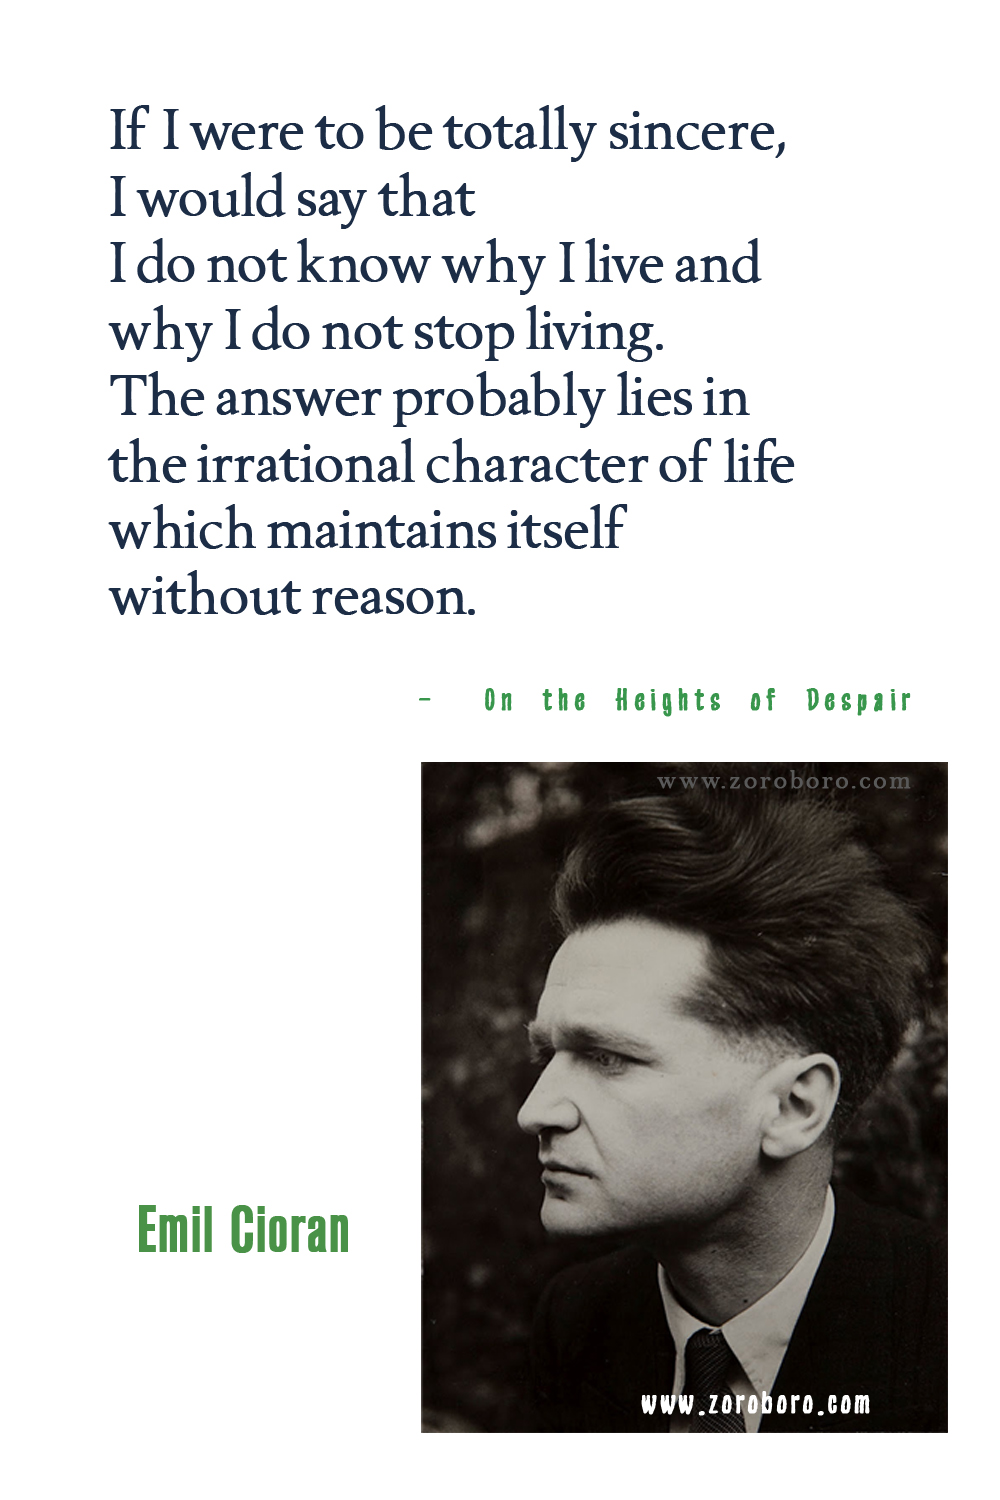 Emil Cioran Quotes, Emil Cioran Philosophy, Emil Cioran Books Quotes, Emil Cioran The Trouble with Being Born (book), On the Heights of Despair Quotes.